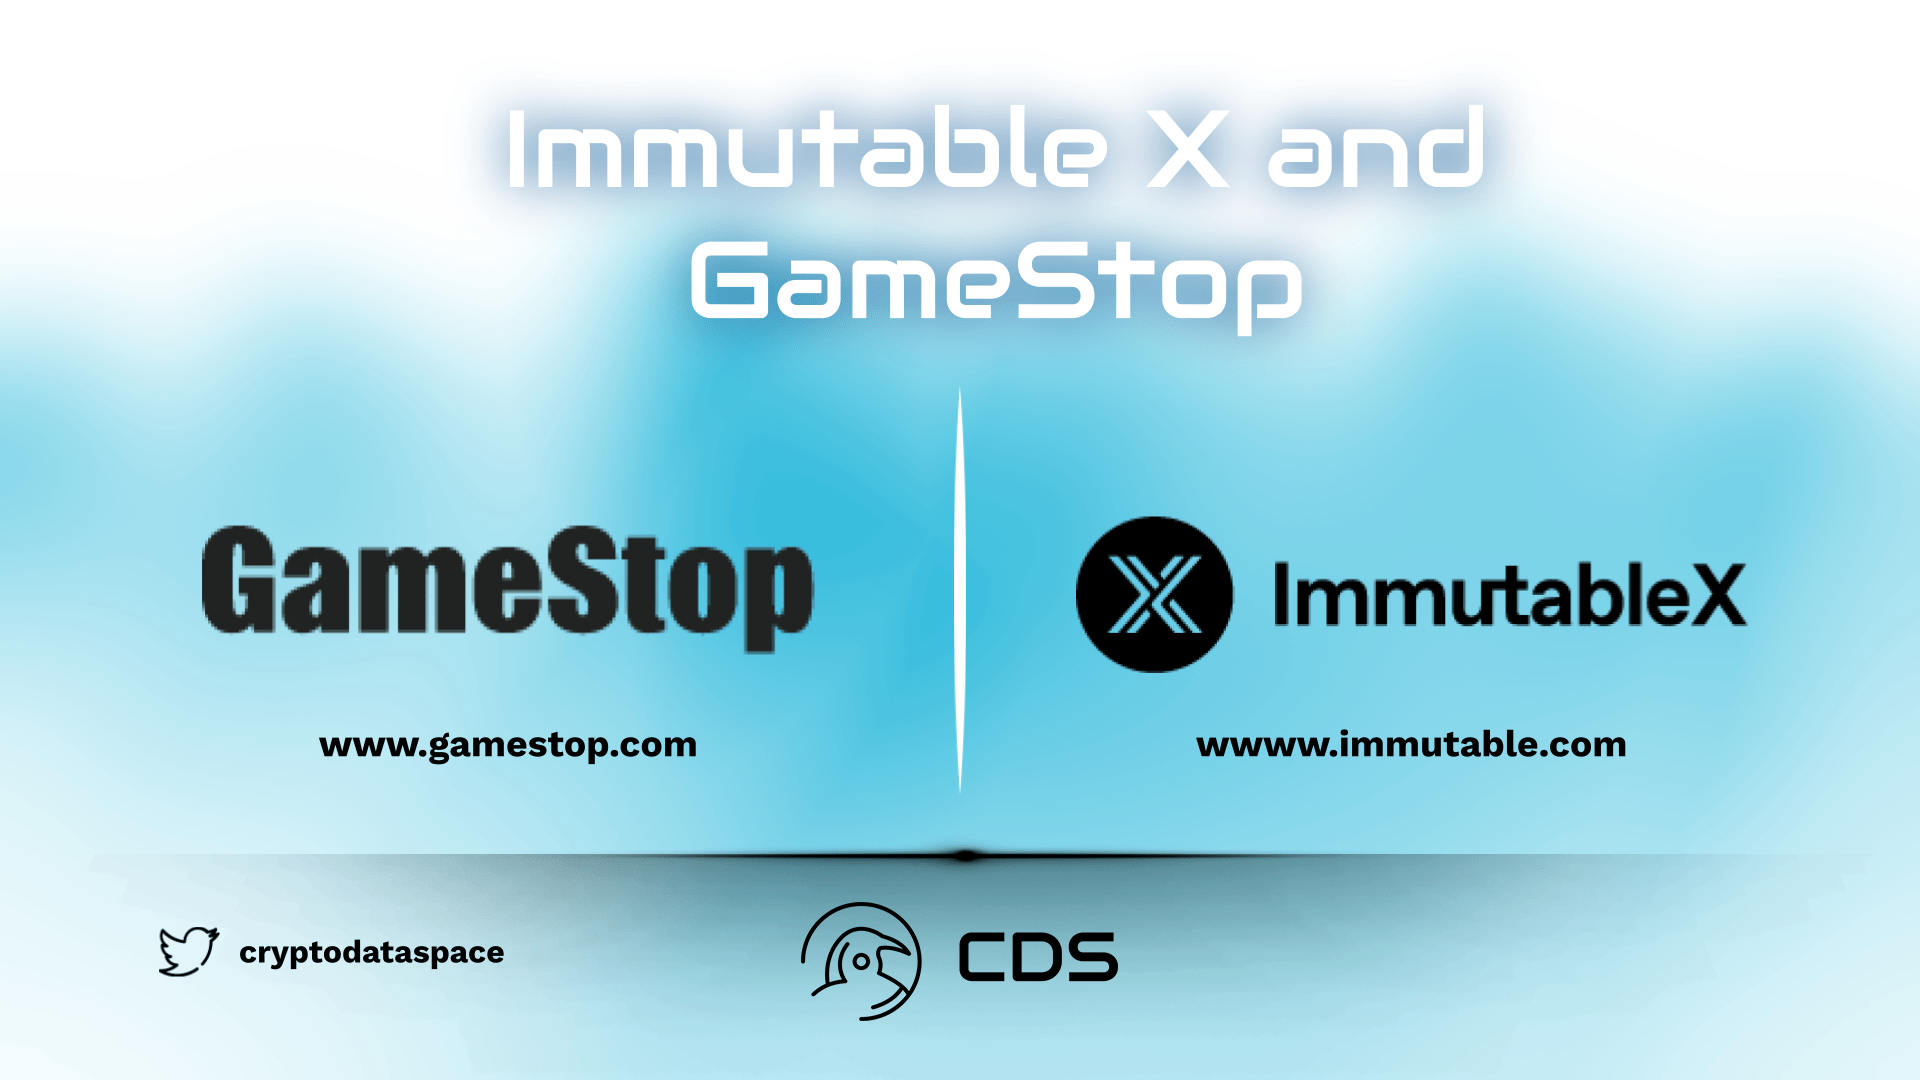 Immutable X and GameStop Officially Launch the Gaming NFT Marketplace